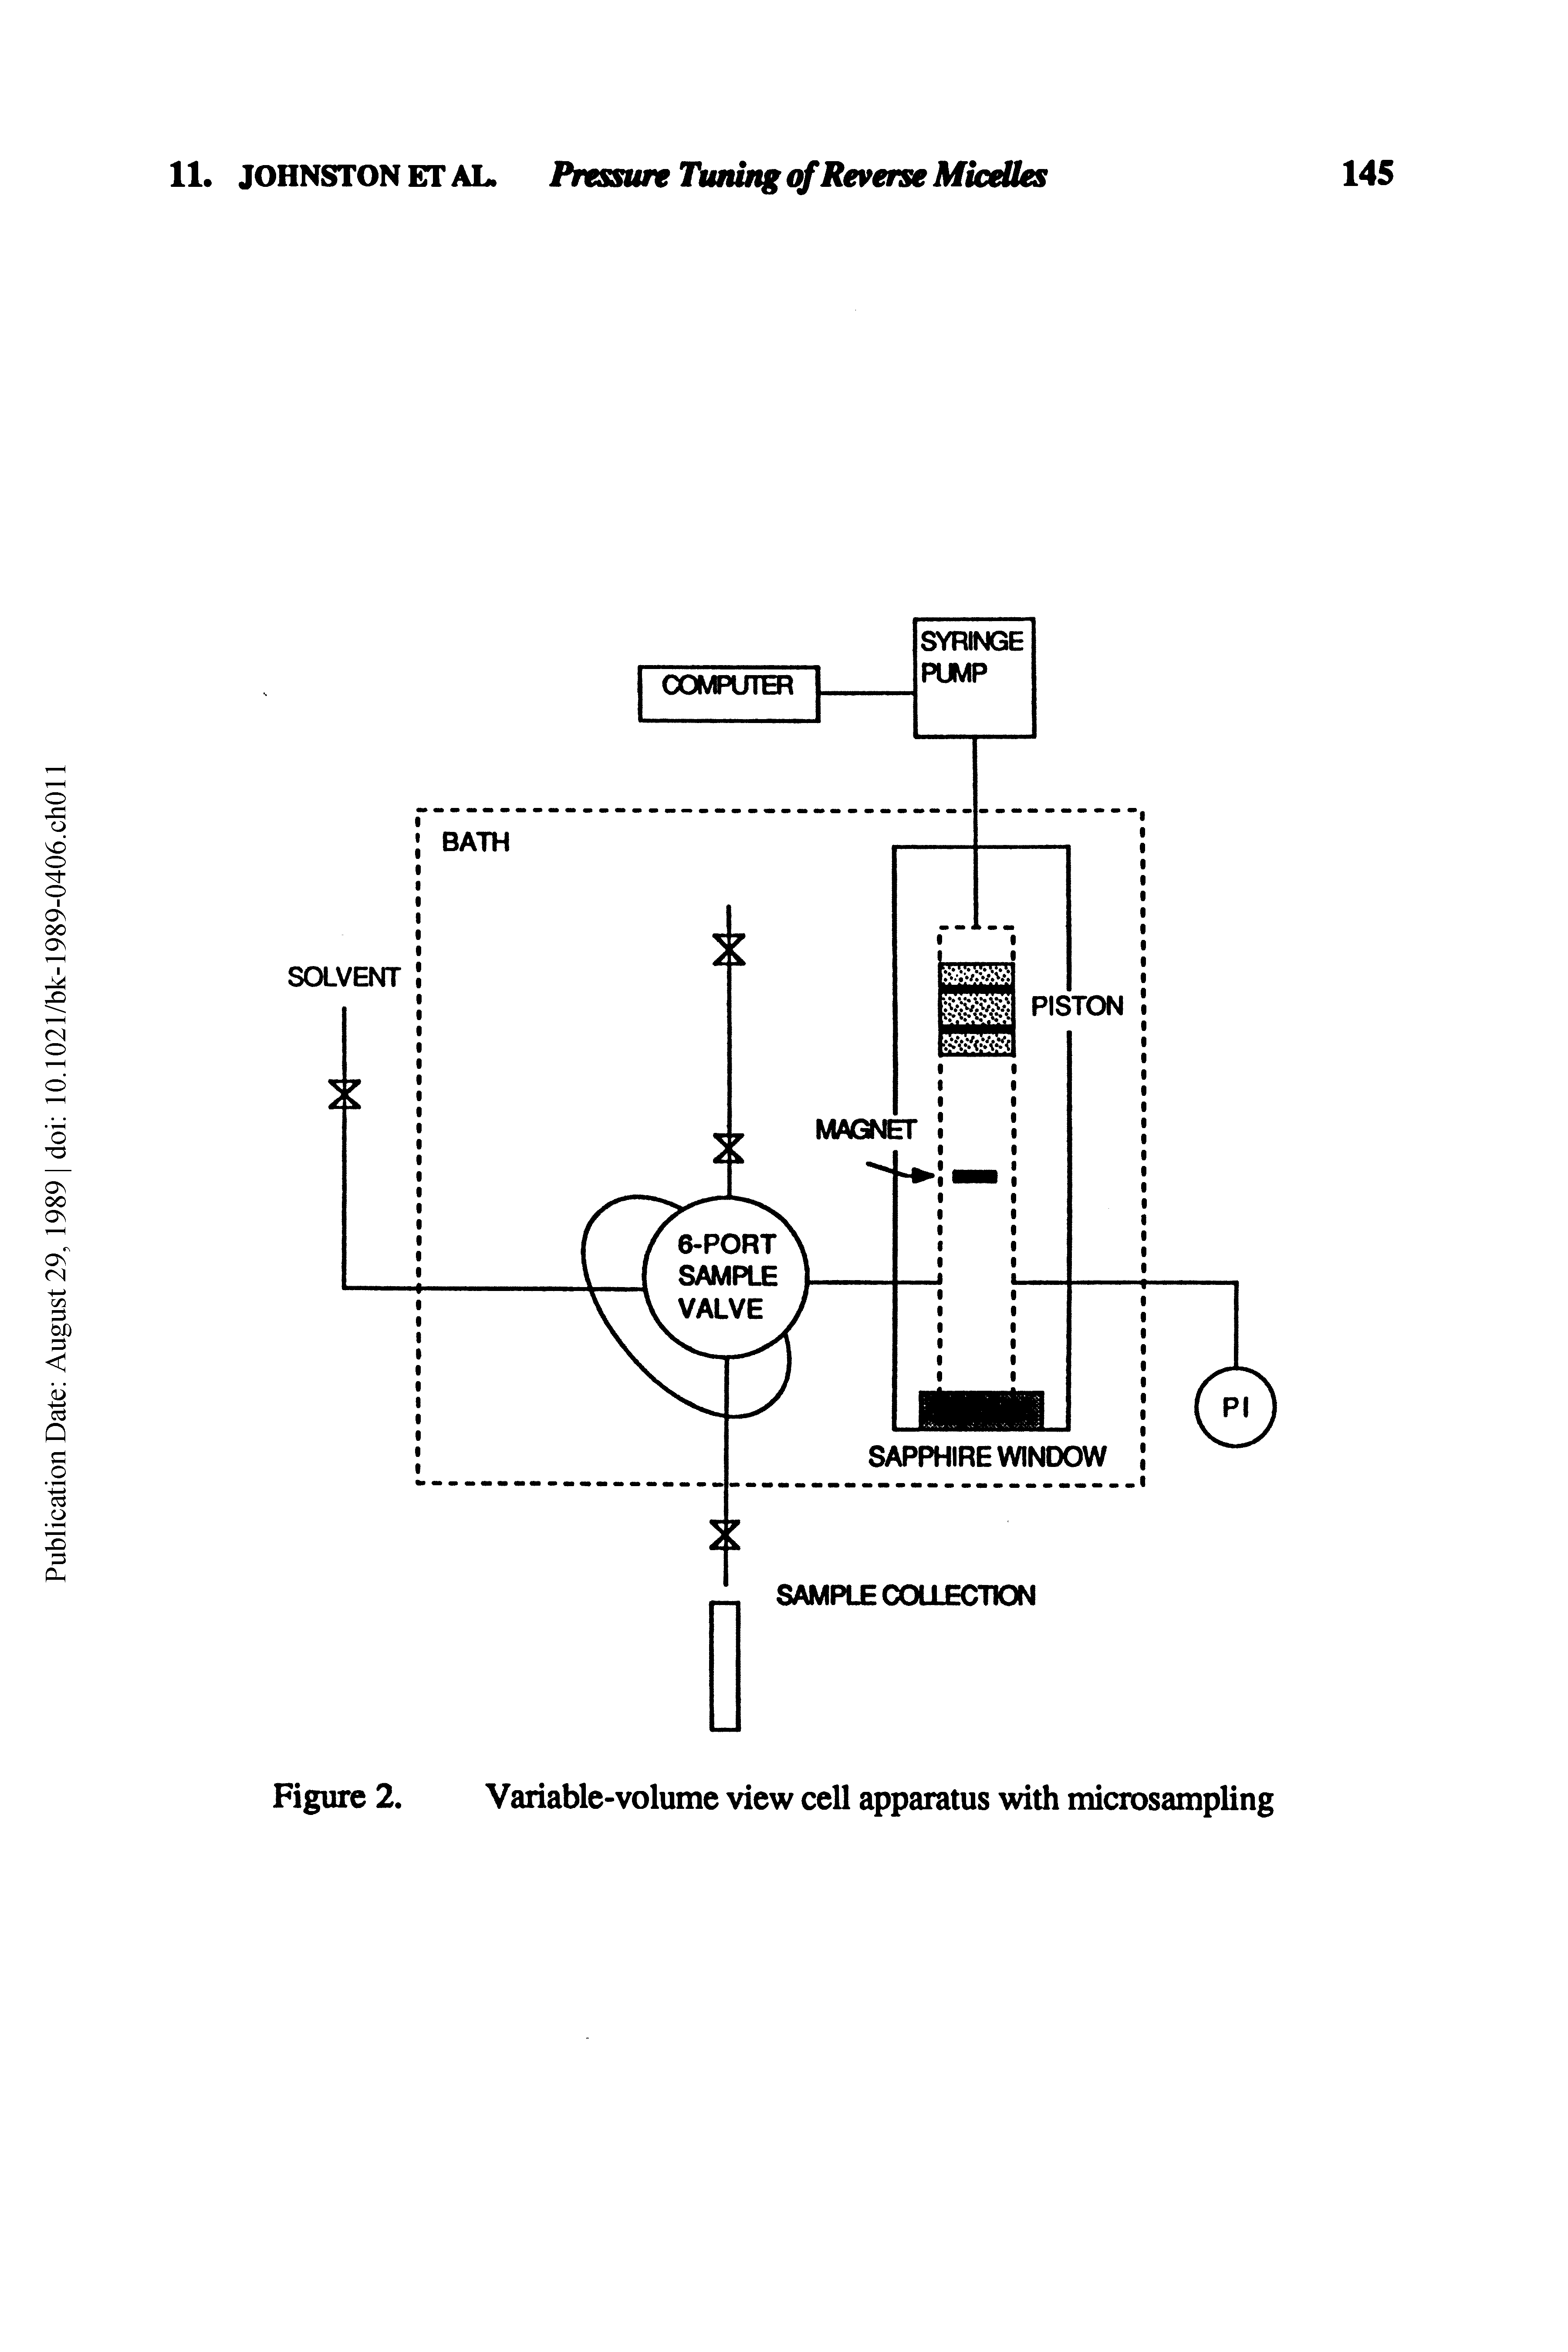 Figure 2. Variable-volume view cell apparatus with microsampling...